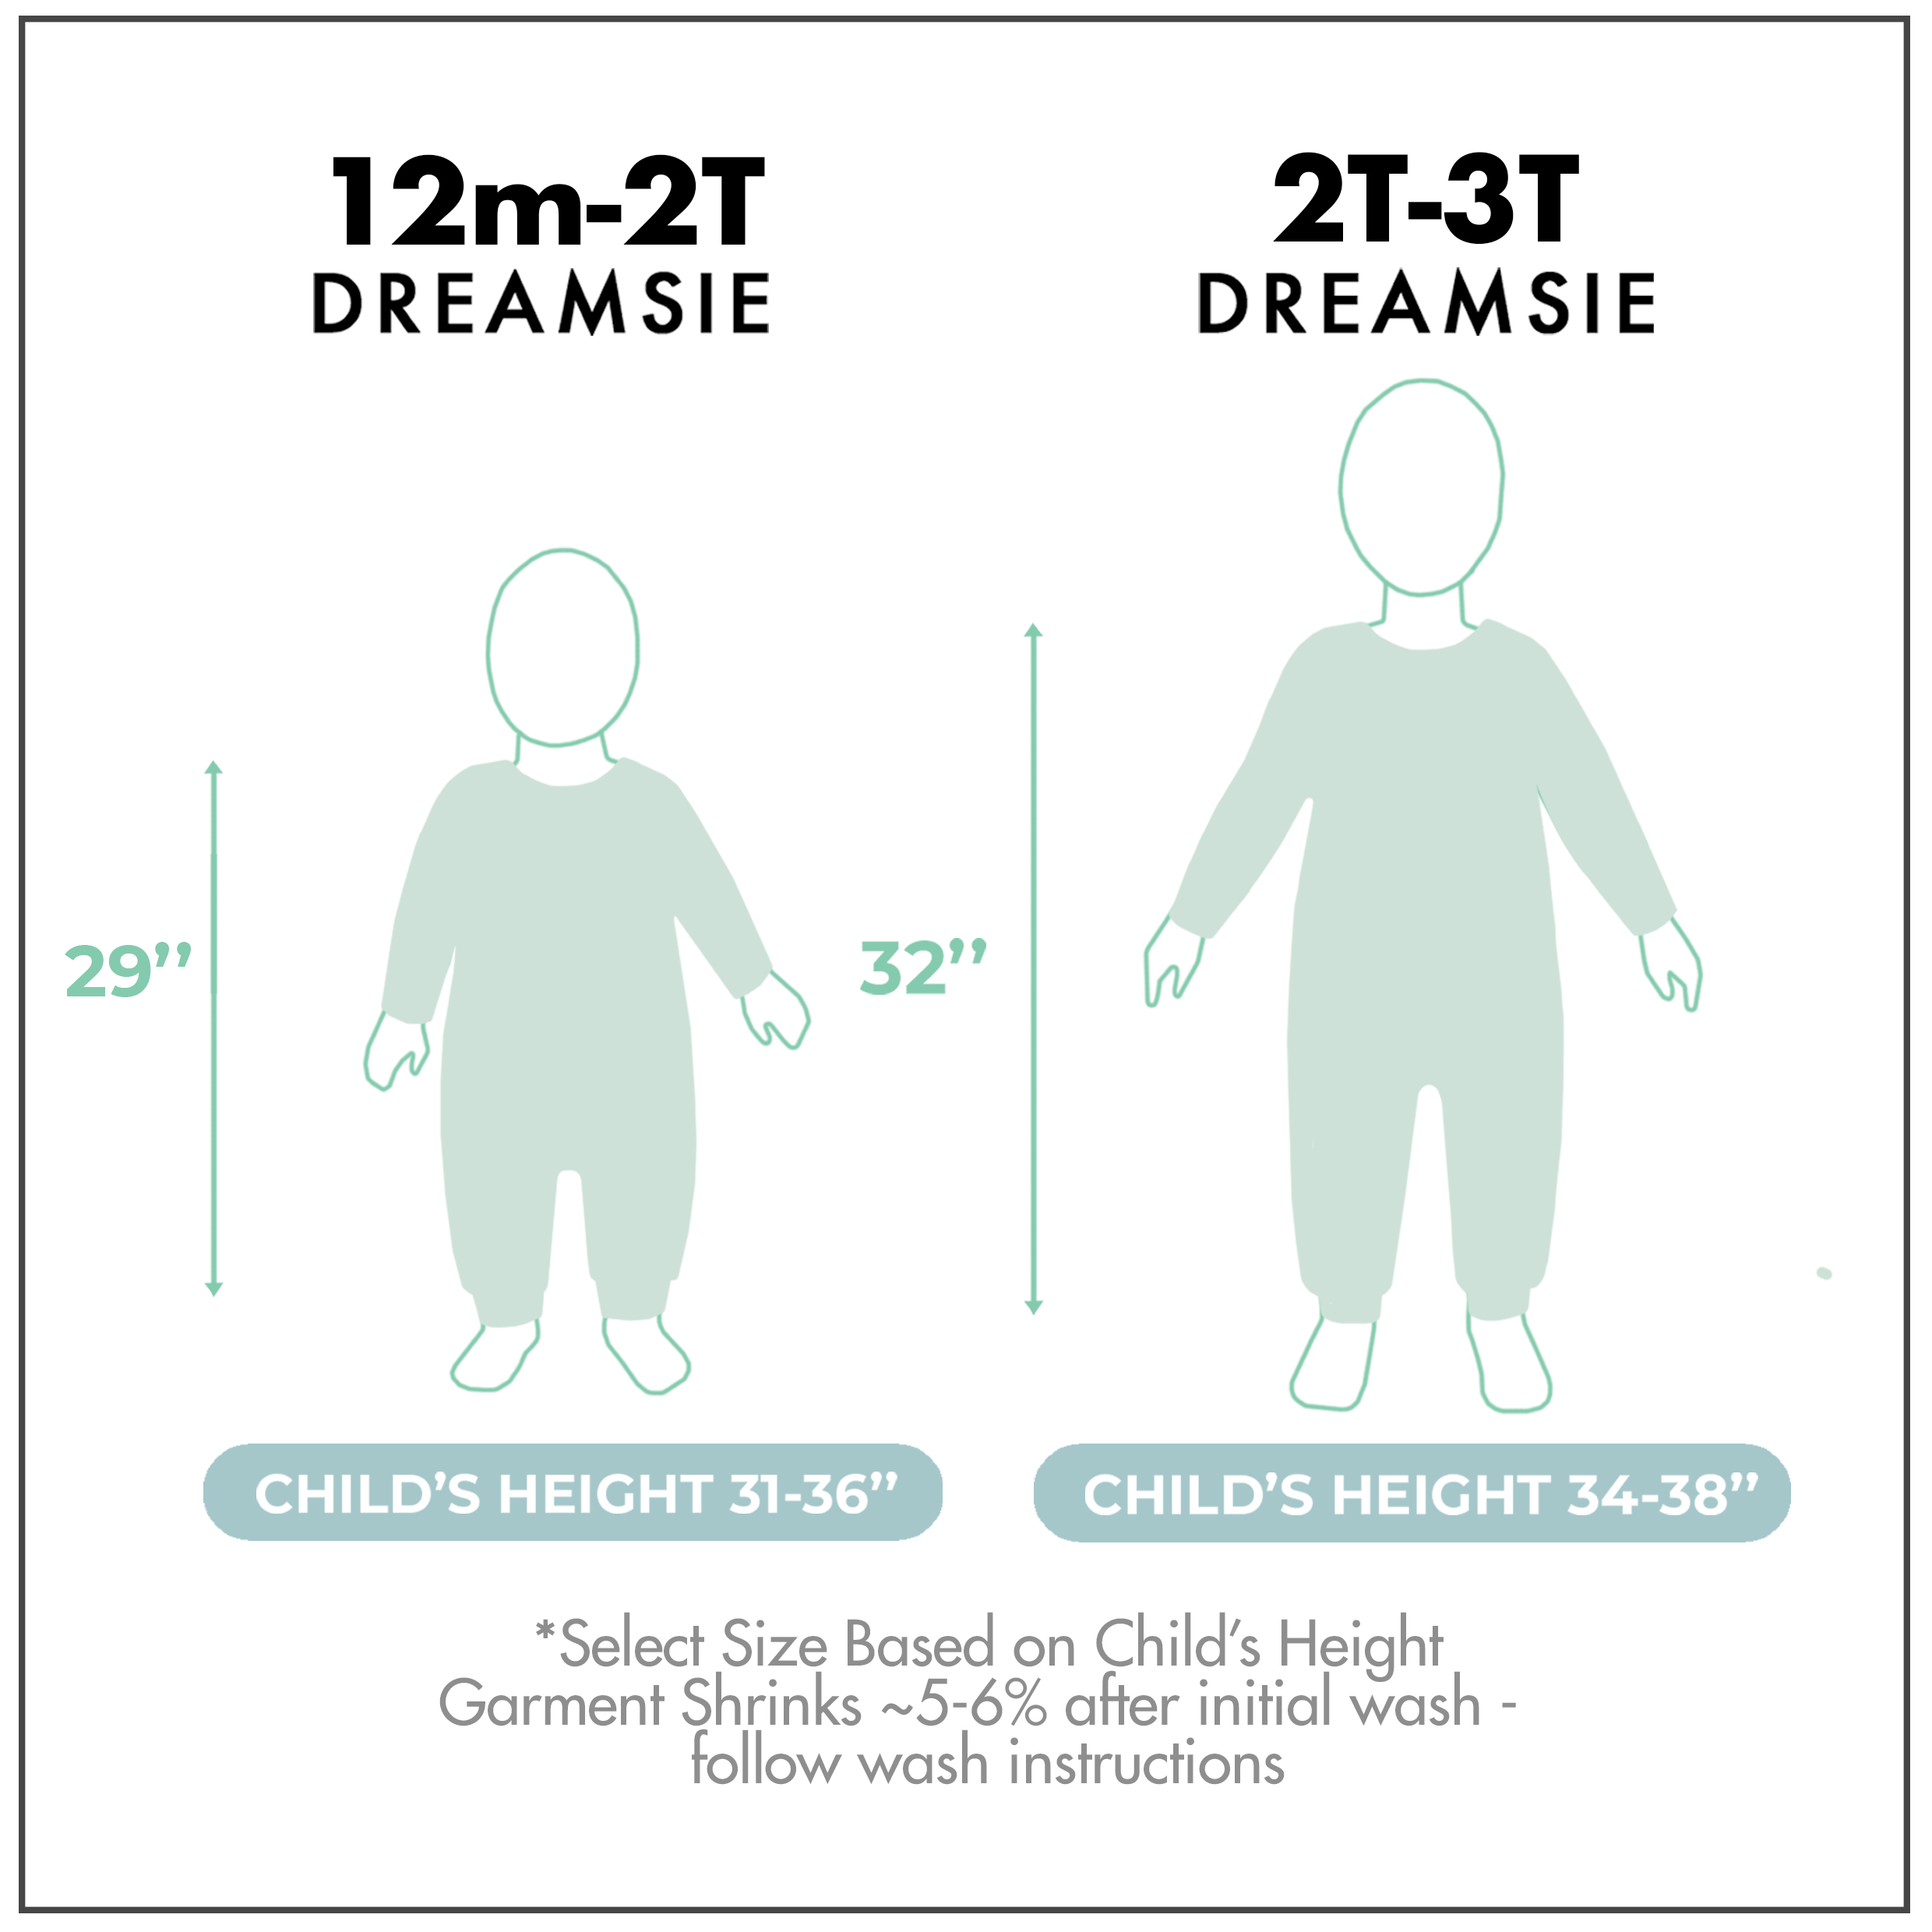 DREAMSIE SIZE CHART, 12m to 2T 29 inches length perfect for 31 to 36 inches child's height, Size 2T to 3T 32 inches length perfect for 34 to 38 inches child's height. Select size based on Child's height. Garment shringks 5 - 6% after initial wash. Follow wash instruction.